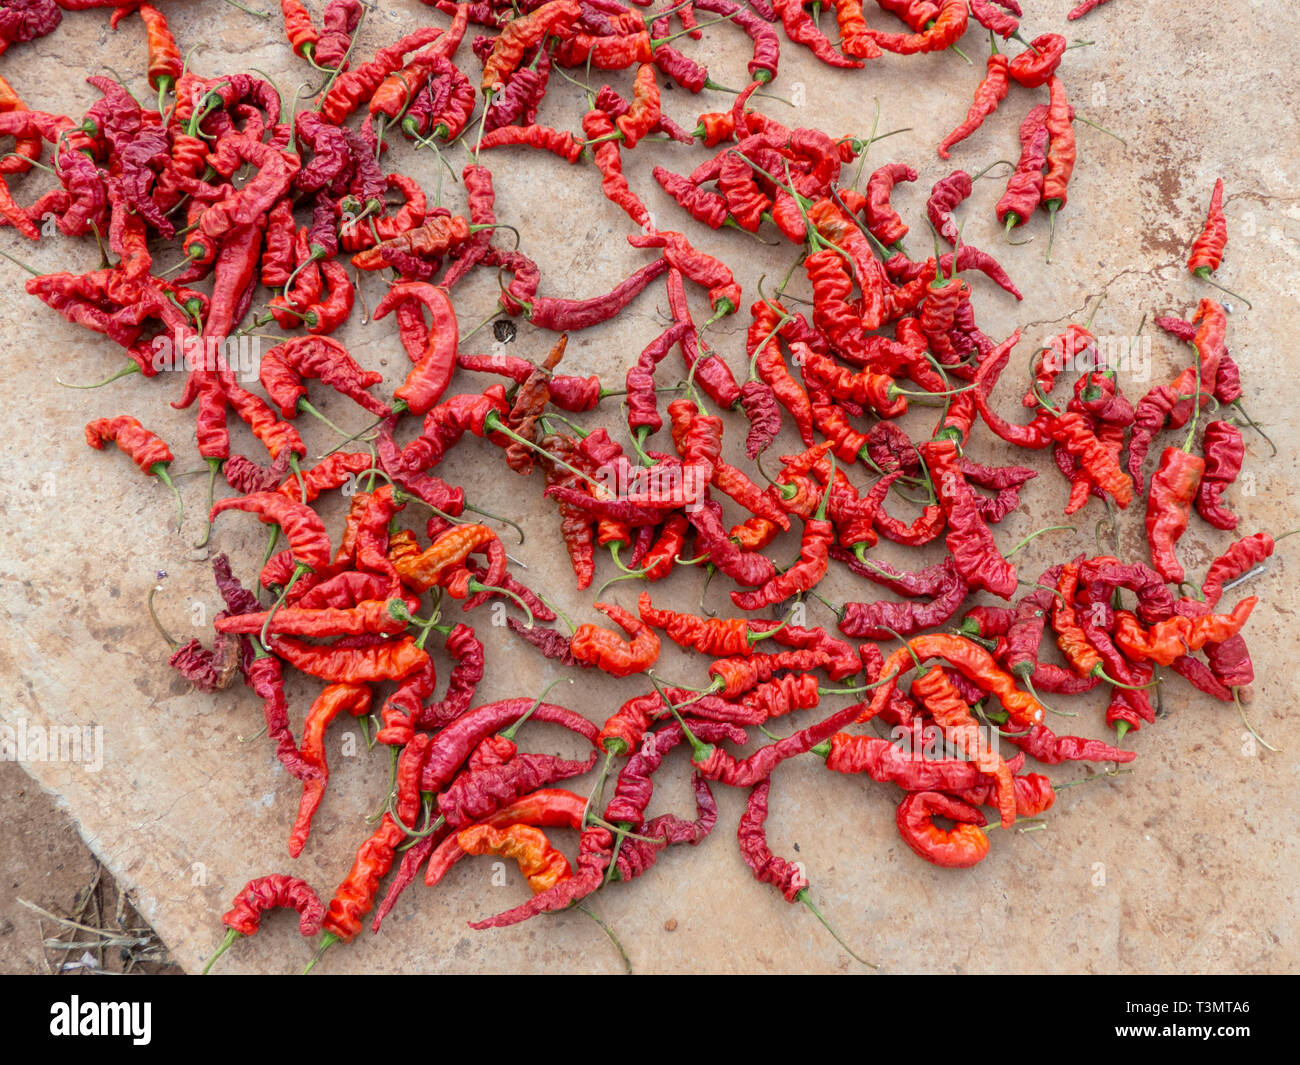 Hot peppers drying in the sun. Photographed in Yunnan, China Stock Photo